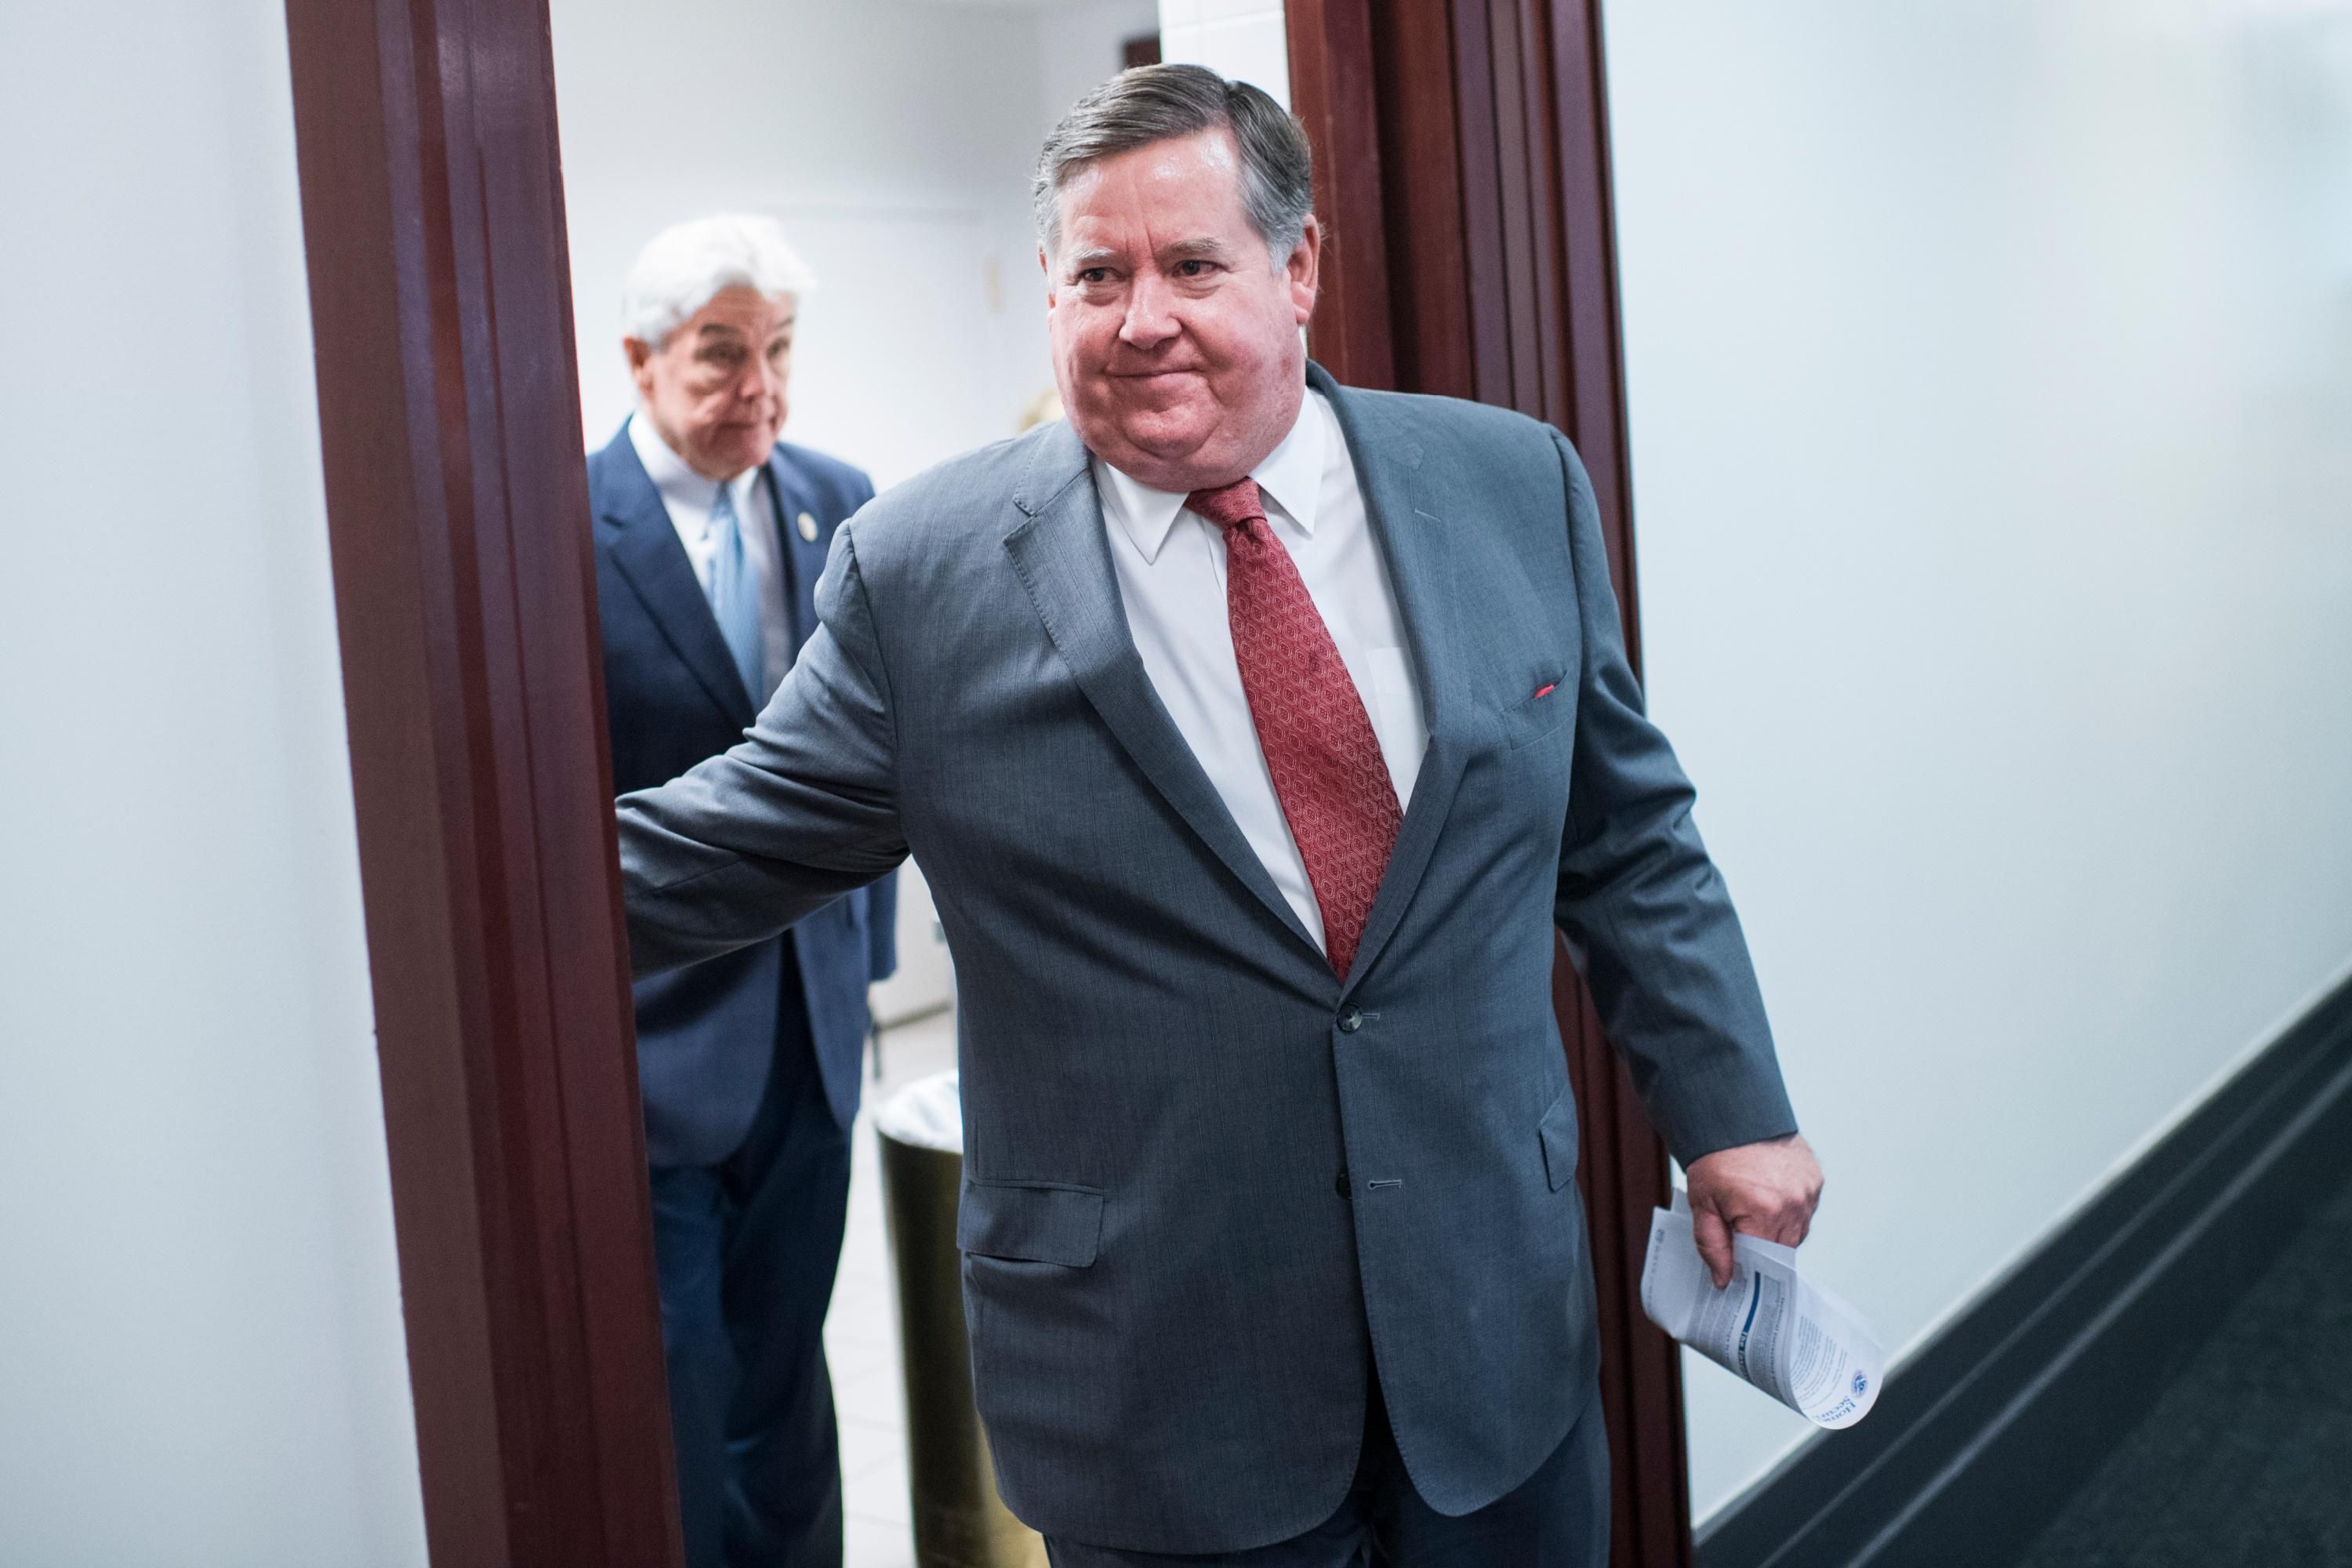 Rep. Ken Calvert (R-Calif.) leaves a meeting at the Capitol in Washington, D.C. on November 28, 2018. (Photo: Tom Williams/CQ Roll Call via Getty Images)